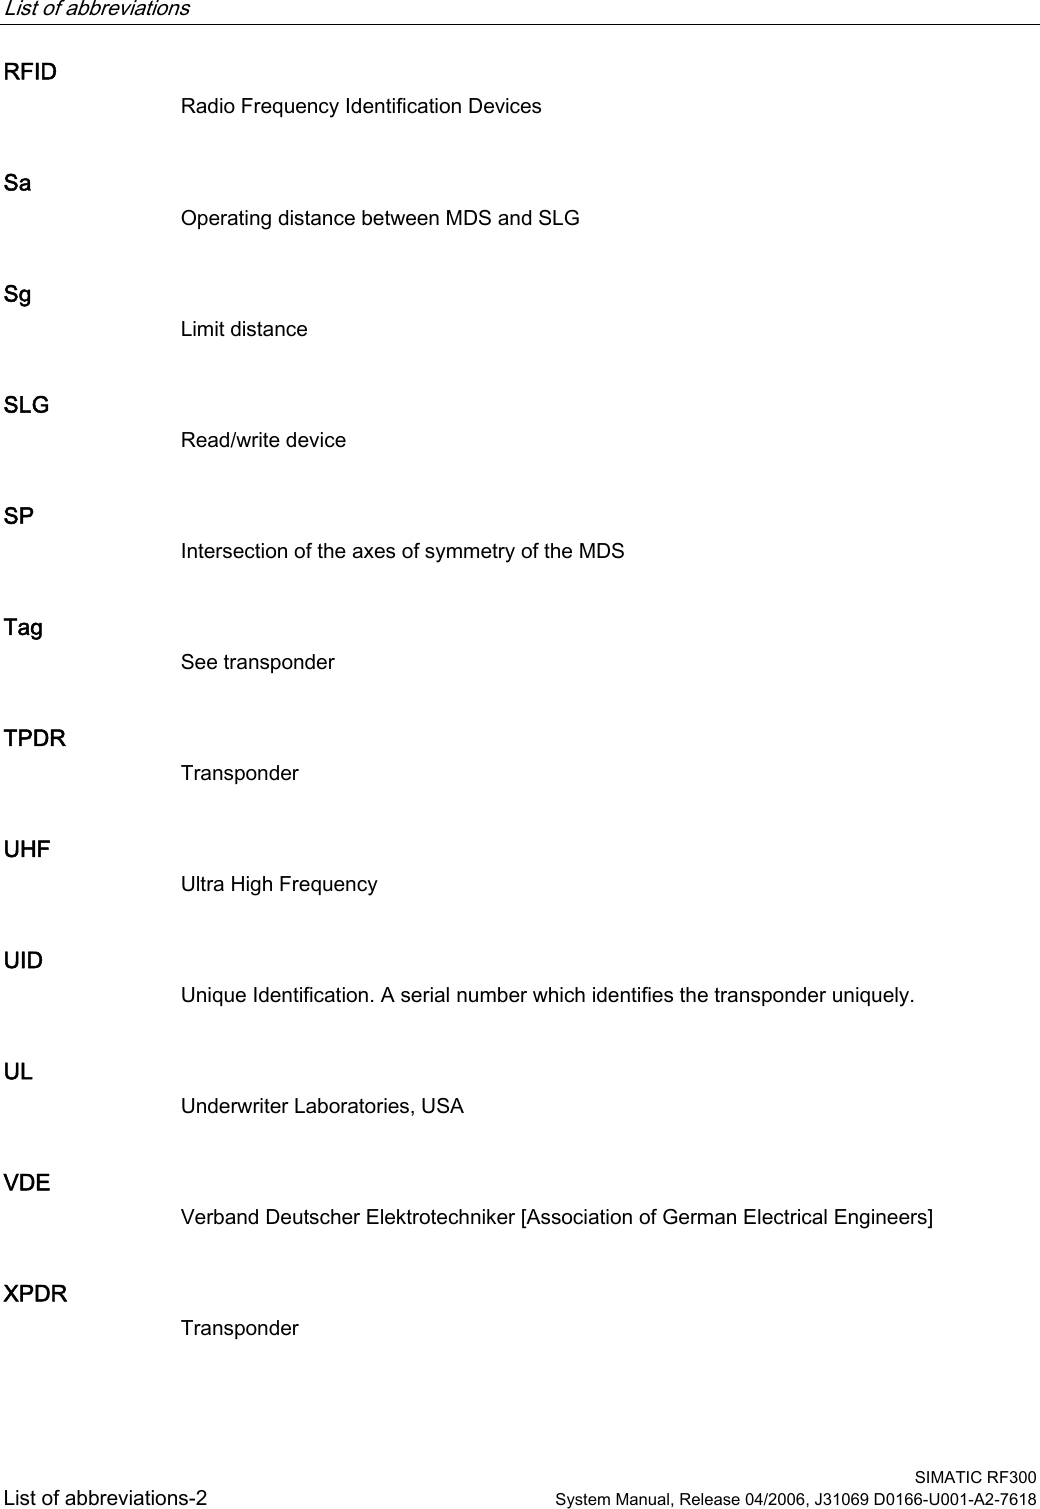 List of abbreviations    SIMATIC RF300 List of abbreviations-2  System Manual, Release 04/2006, J31069 D0166-U001-A2-7618 RFID Radio Frequency Identification Devices Sa Operating distance between MDS and SLG Sg Limit distance SLG Read/write device SP Intersection of the axes of symmetry of the MDS Tag See transponder TPDR Transponder UHF Ultra High Frequency UID Unique Identification. A serial number which identifies the transponder uniquely. UL Underwriter Laboratories, USA VDE Verband Deutscher Elektrotechniker [Association of German Electrical Engineers] XPDR Transponder 